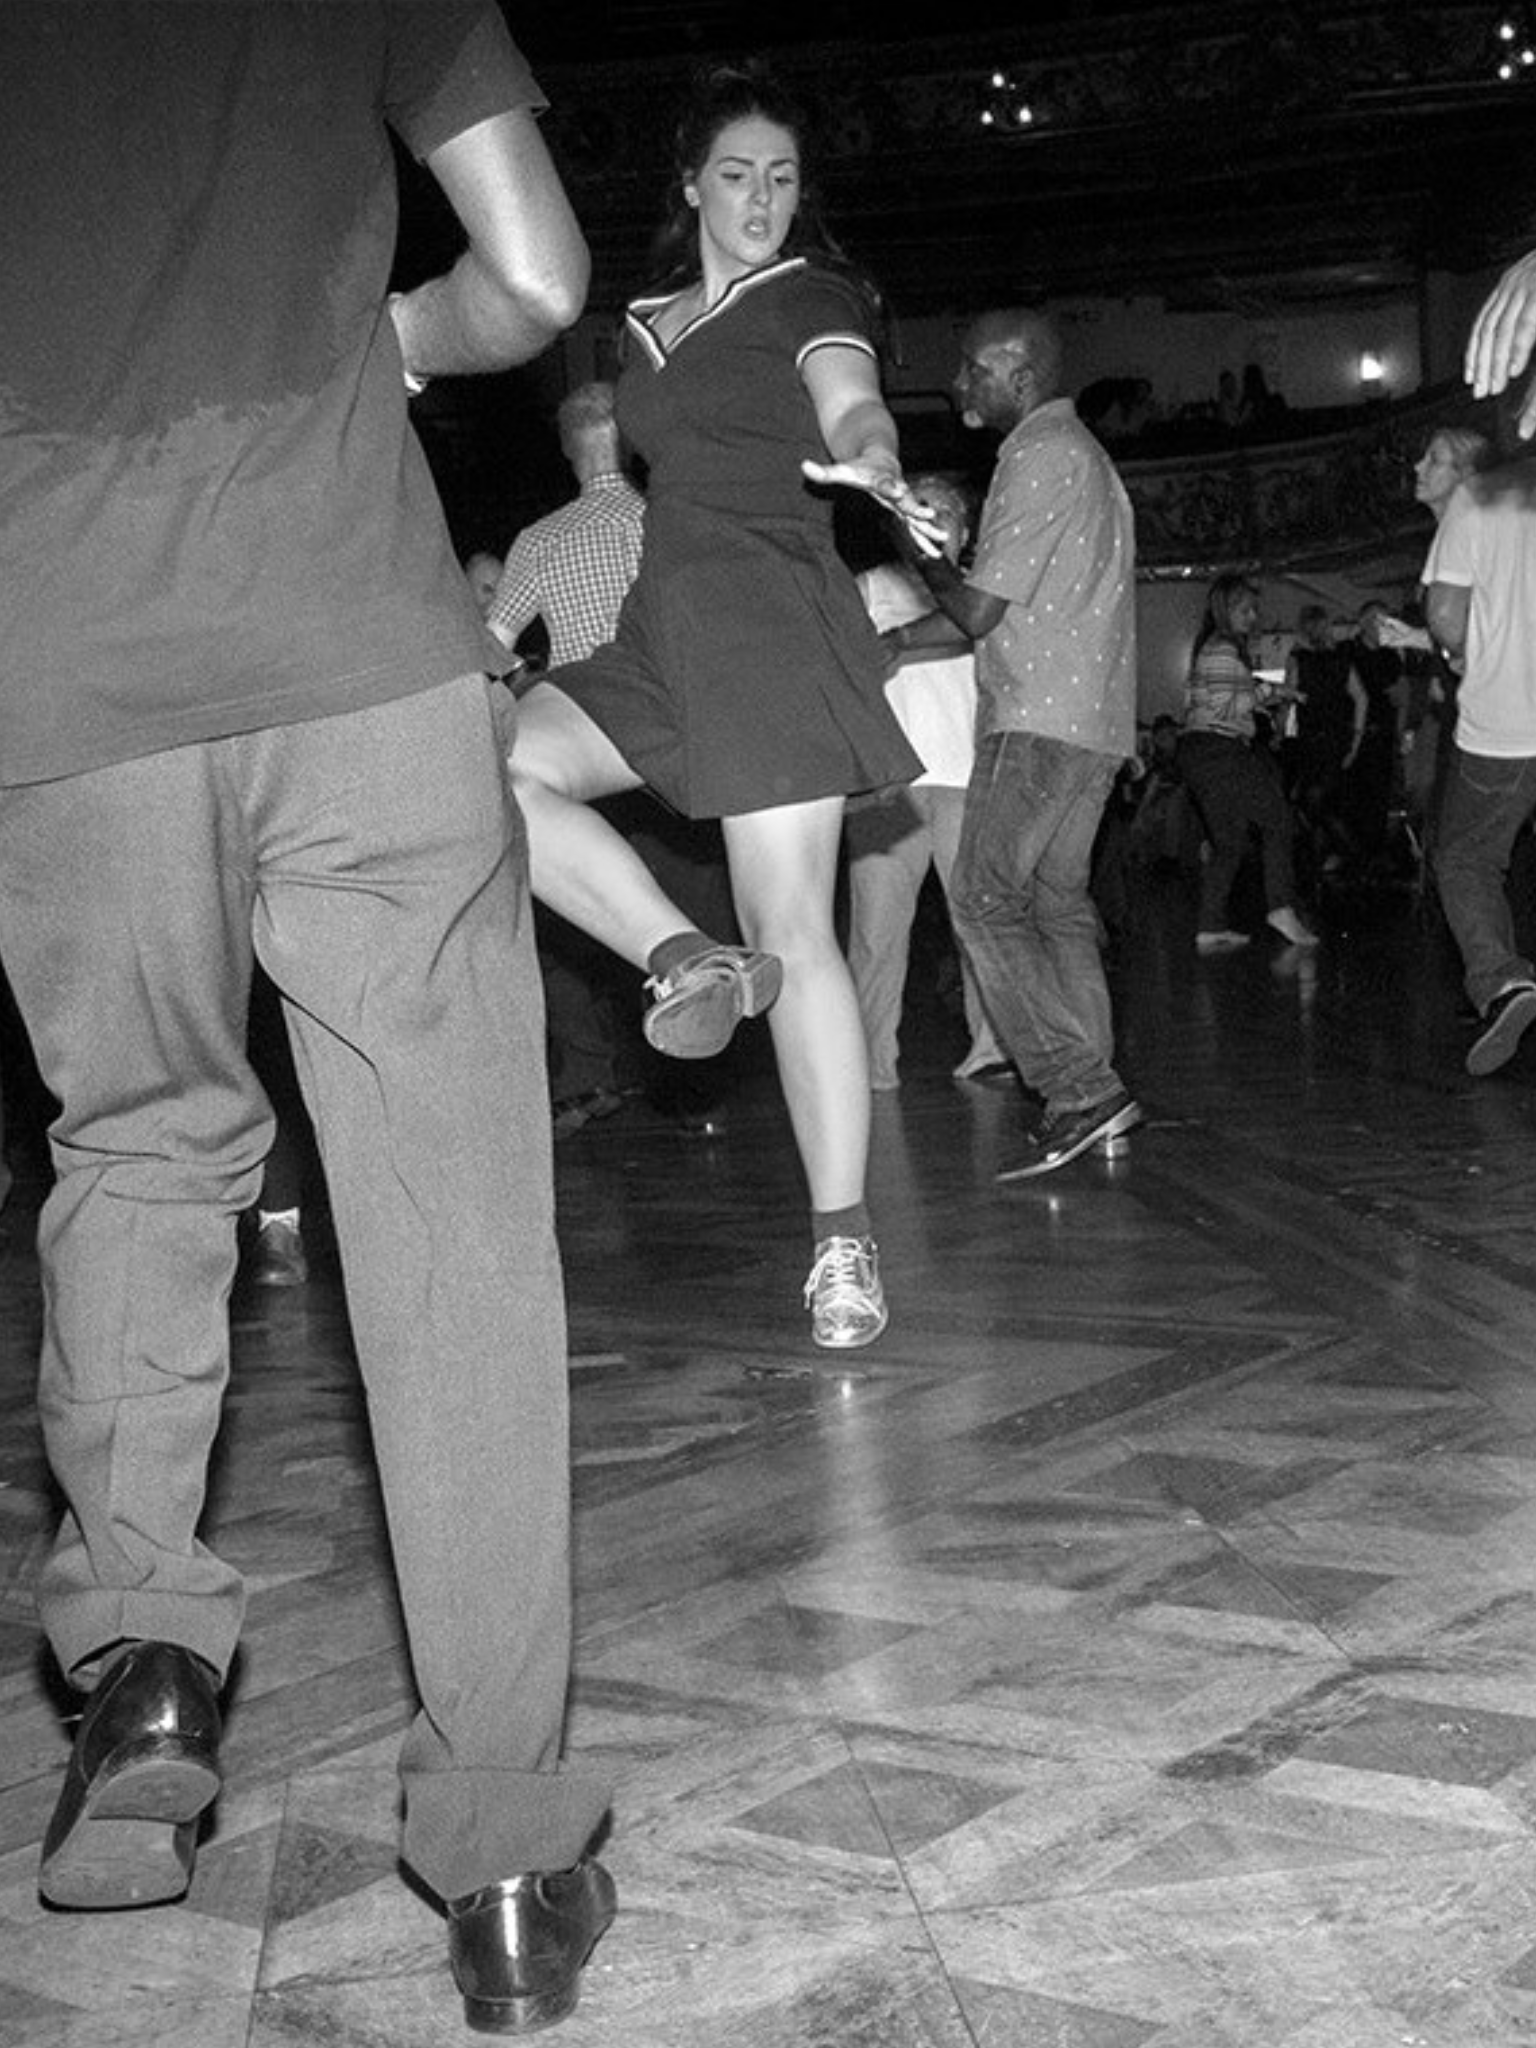 Northern Soul Dancing ideas. northern soul, northern, soul